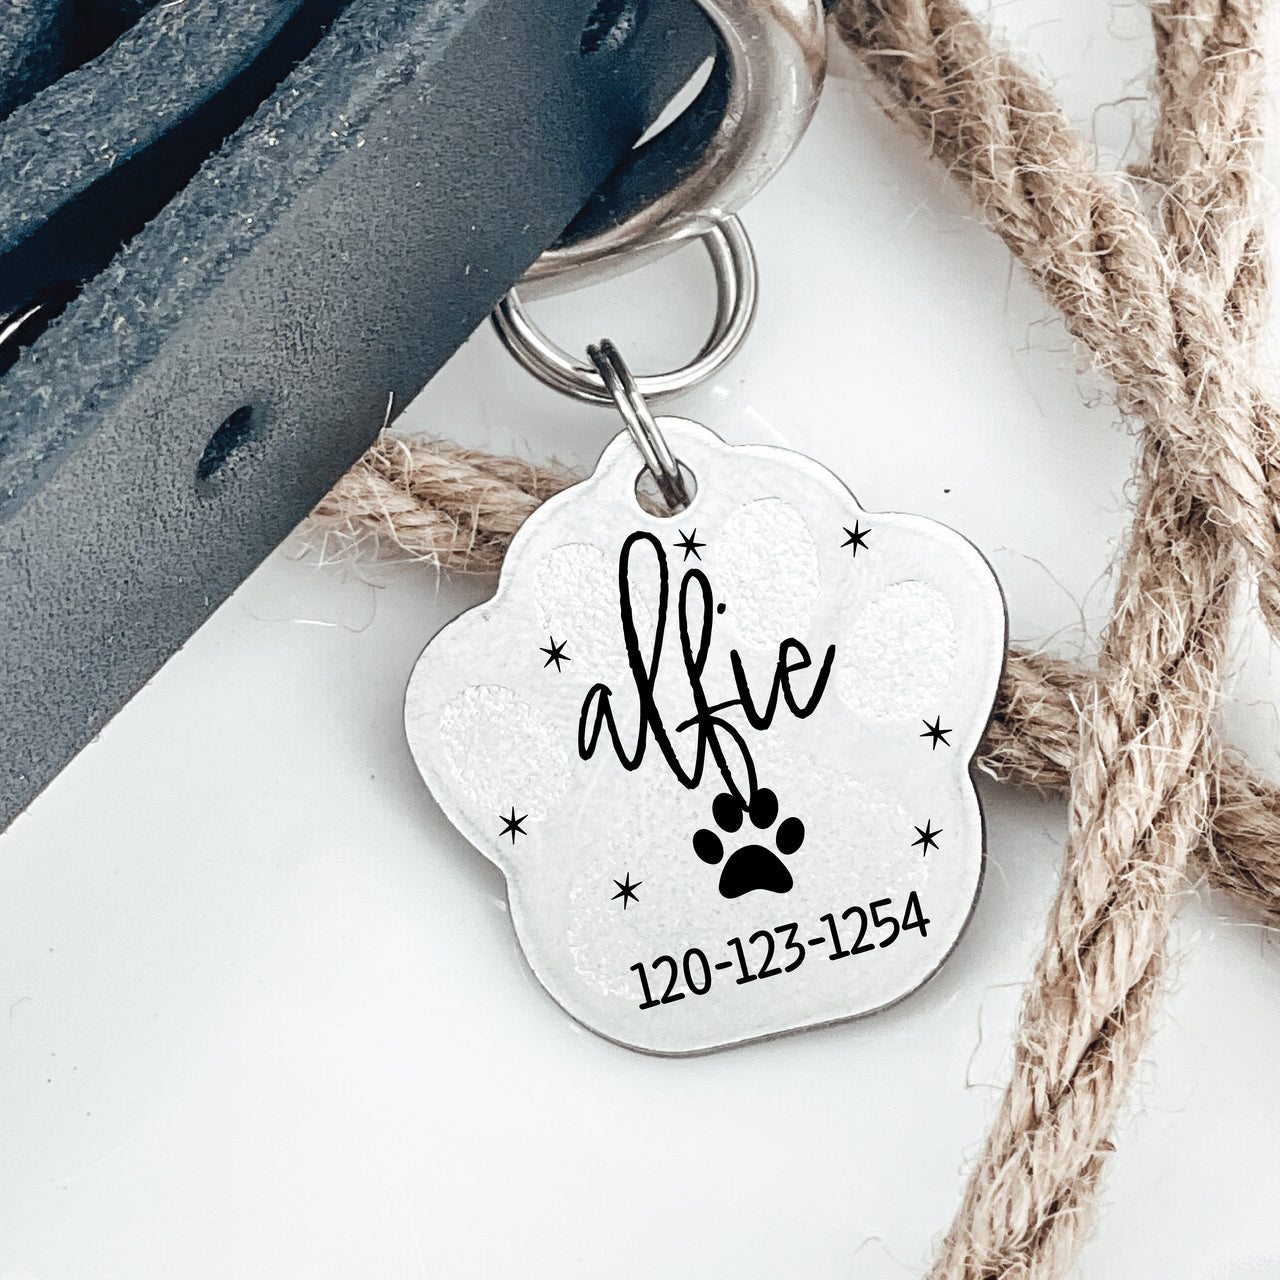 Silver pawprint shaped pet tag joined to collar by two jump rings. Tag has a pawprint, animal name, phone number engraved on it.